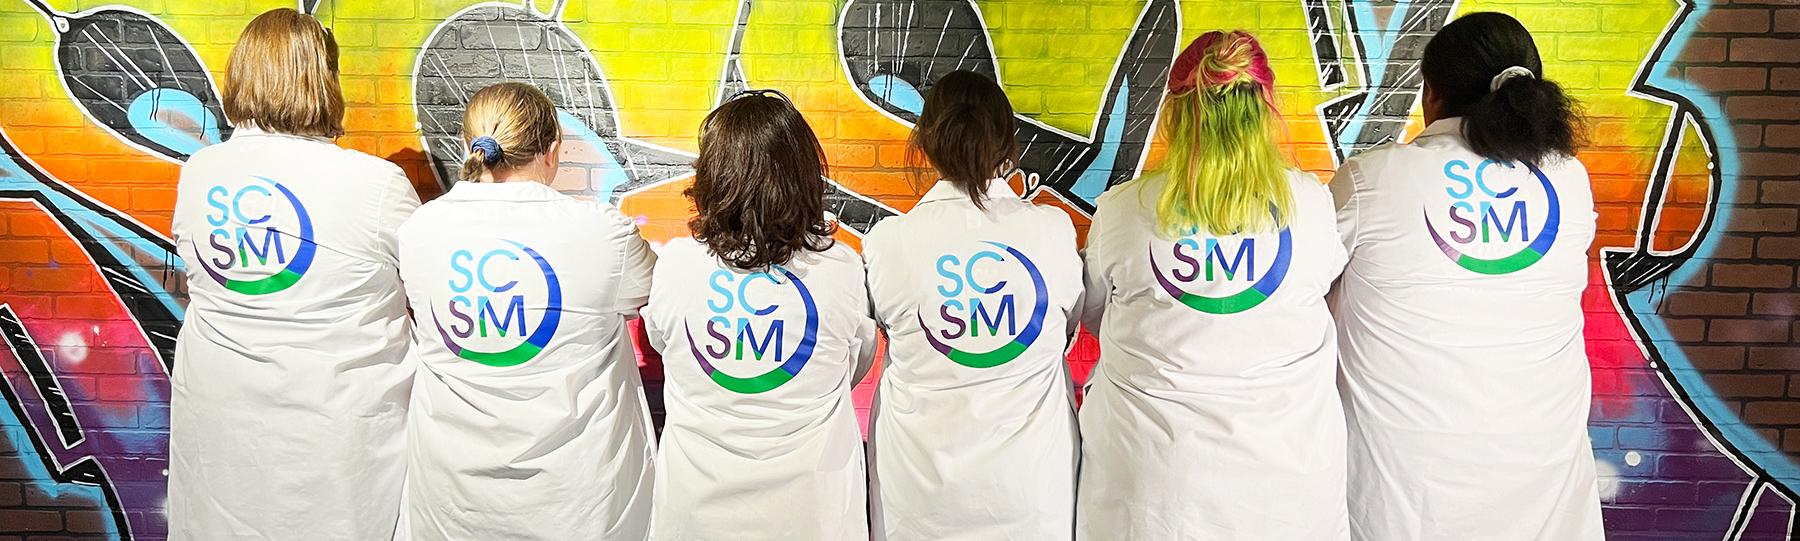 Group stand with backs to camera showing the SCSM logo on the backs of their lab coats